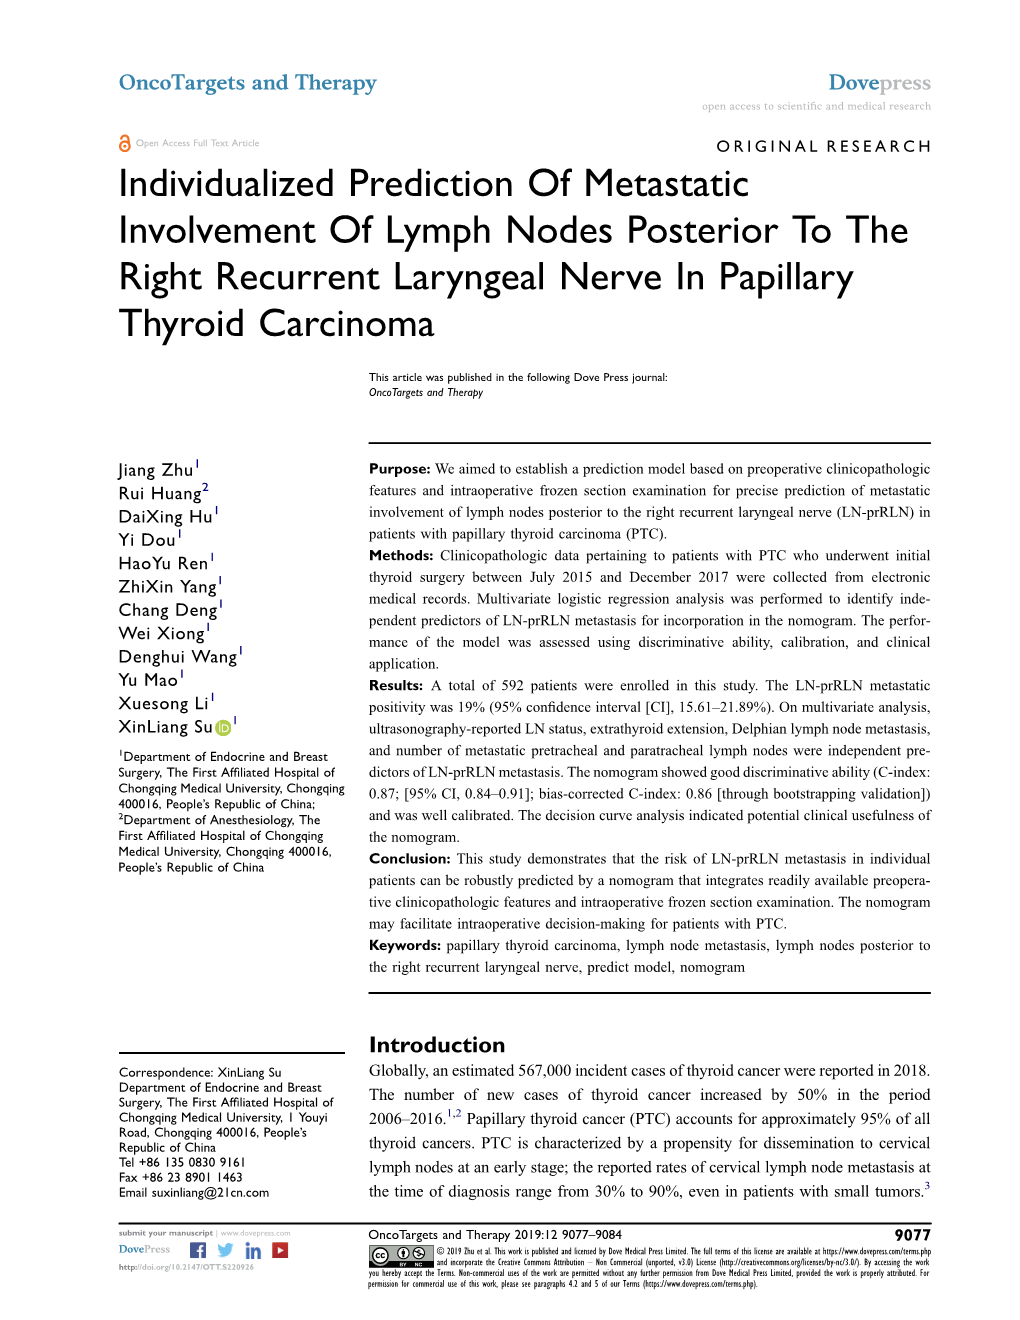 Individualized Prediction of Metastatic Involvement of Lymph Nodes Posterior to the Right Recurrent Laryngeal Nerve in Papillary Thyroid Carcinoma